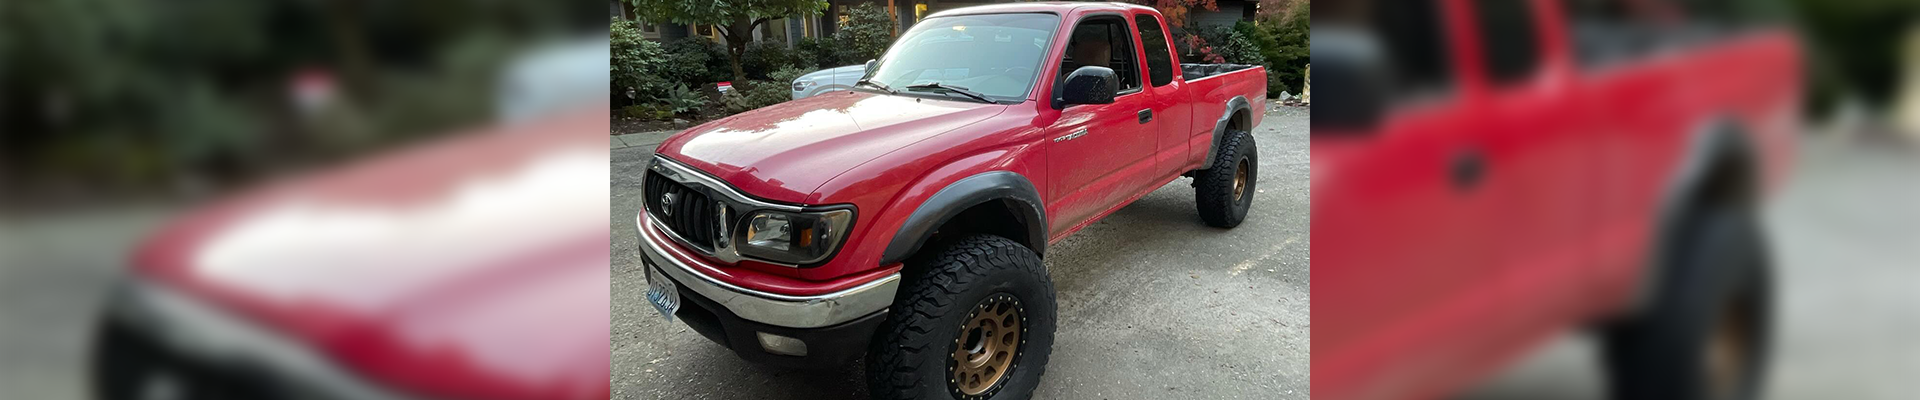 toyota-tacoma-gallery-image.png